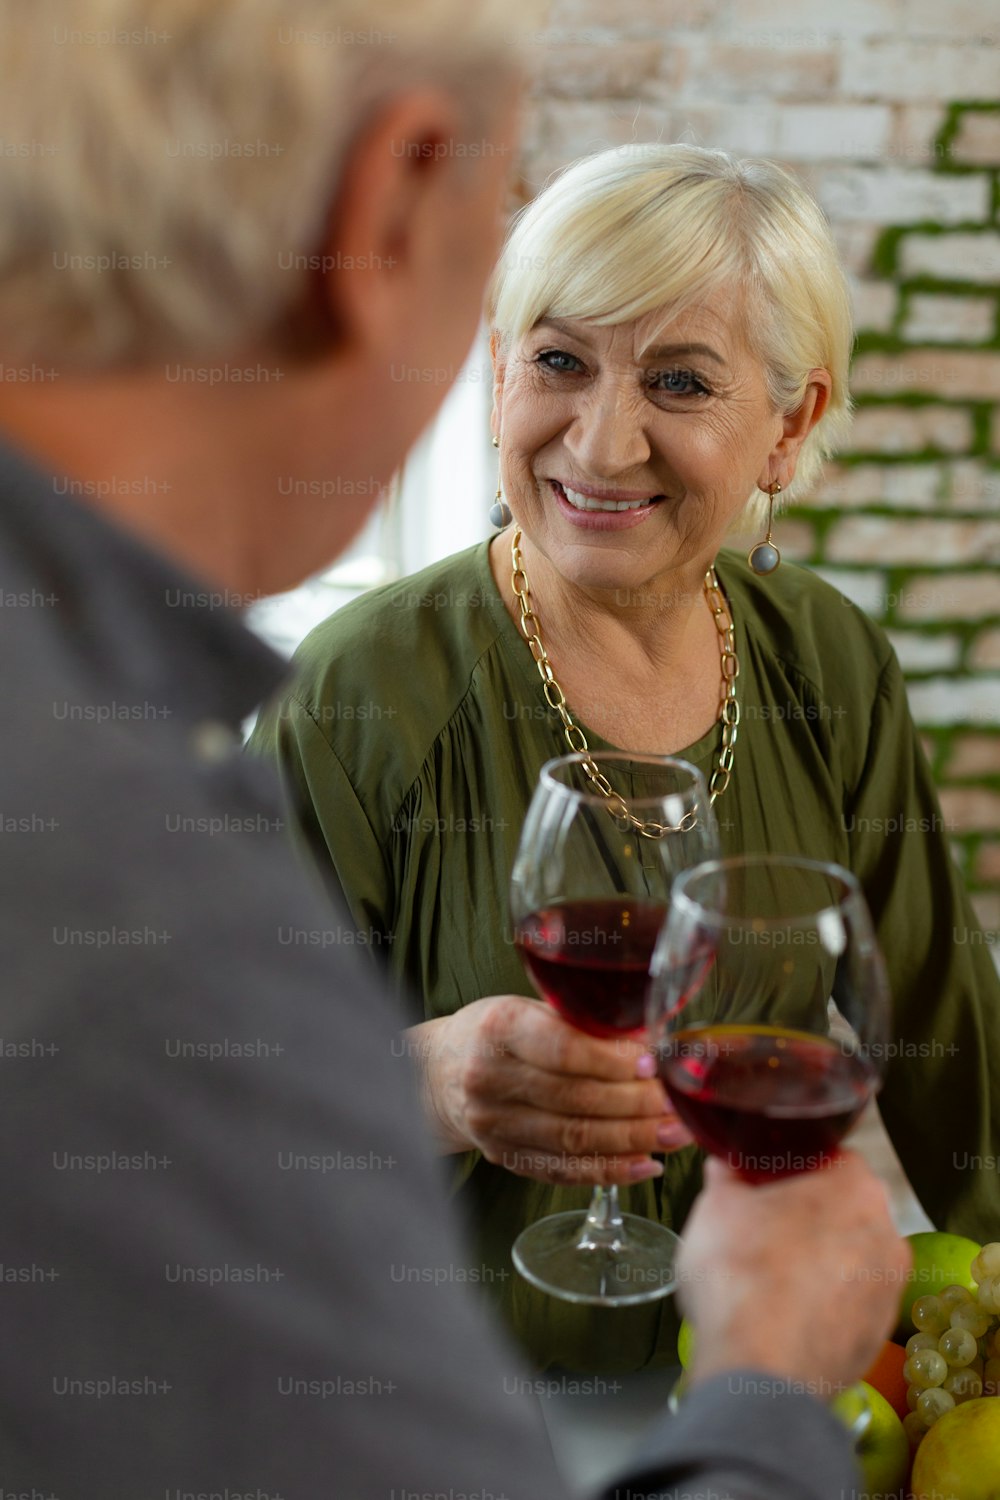 Lovingly look at man. Loving happy smiling beaming glowing white-haired alluring good-looking female wearing emerald elegant garment looking at husband and holding a glass of wine.